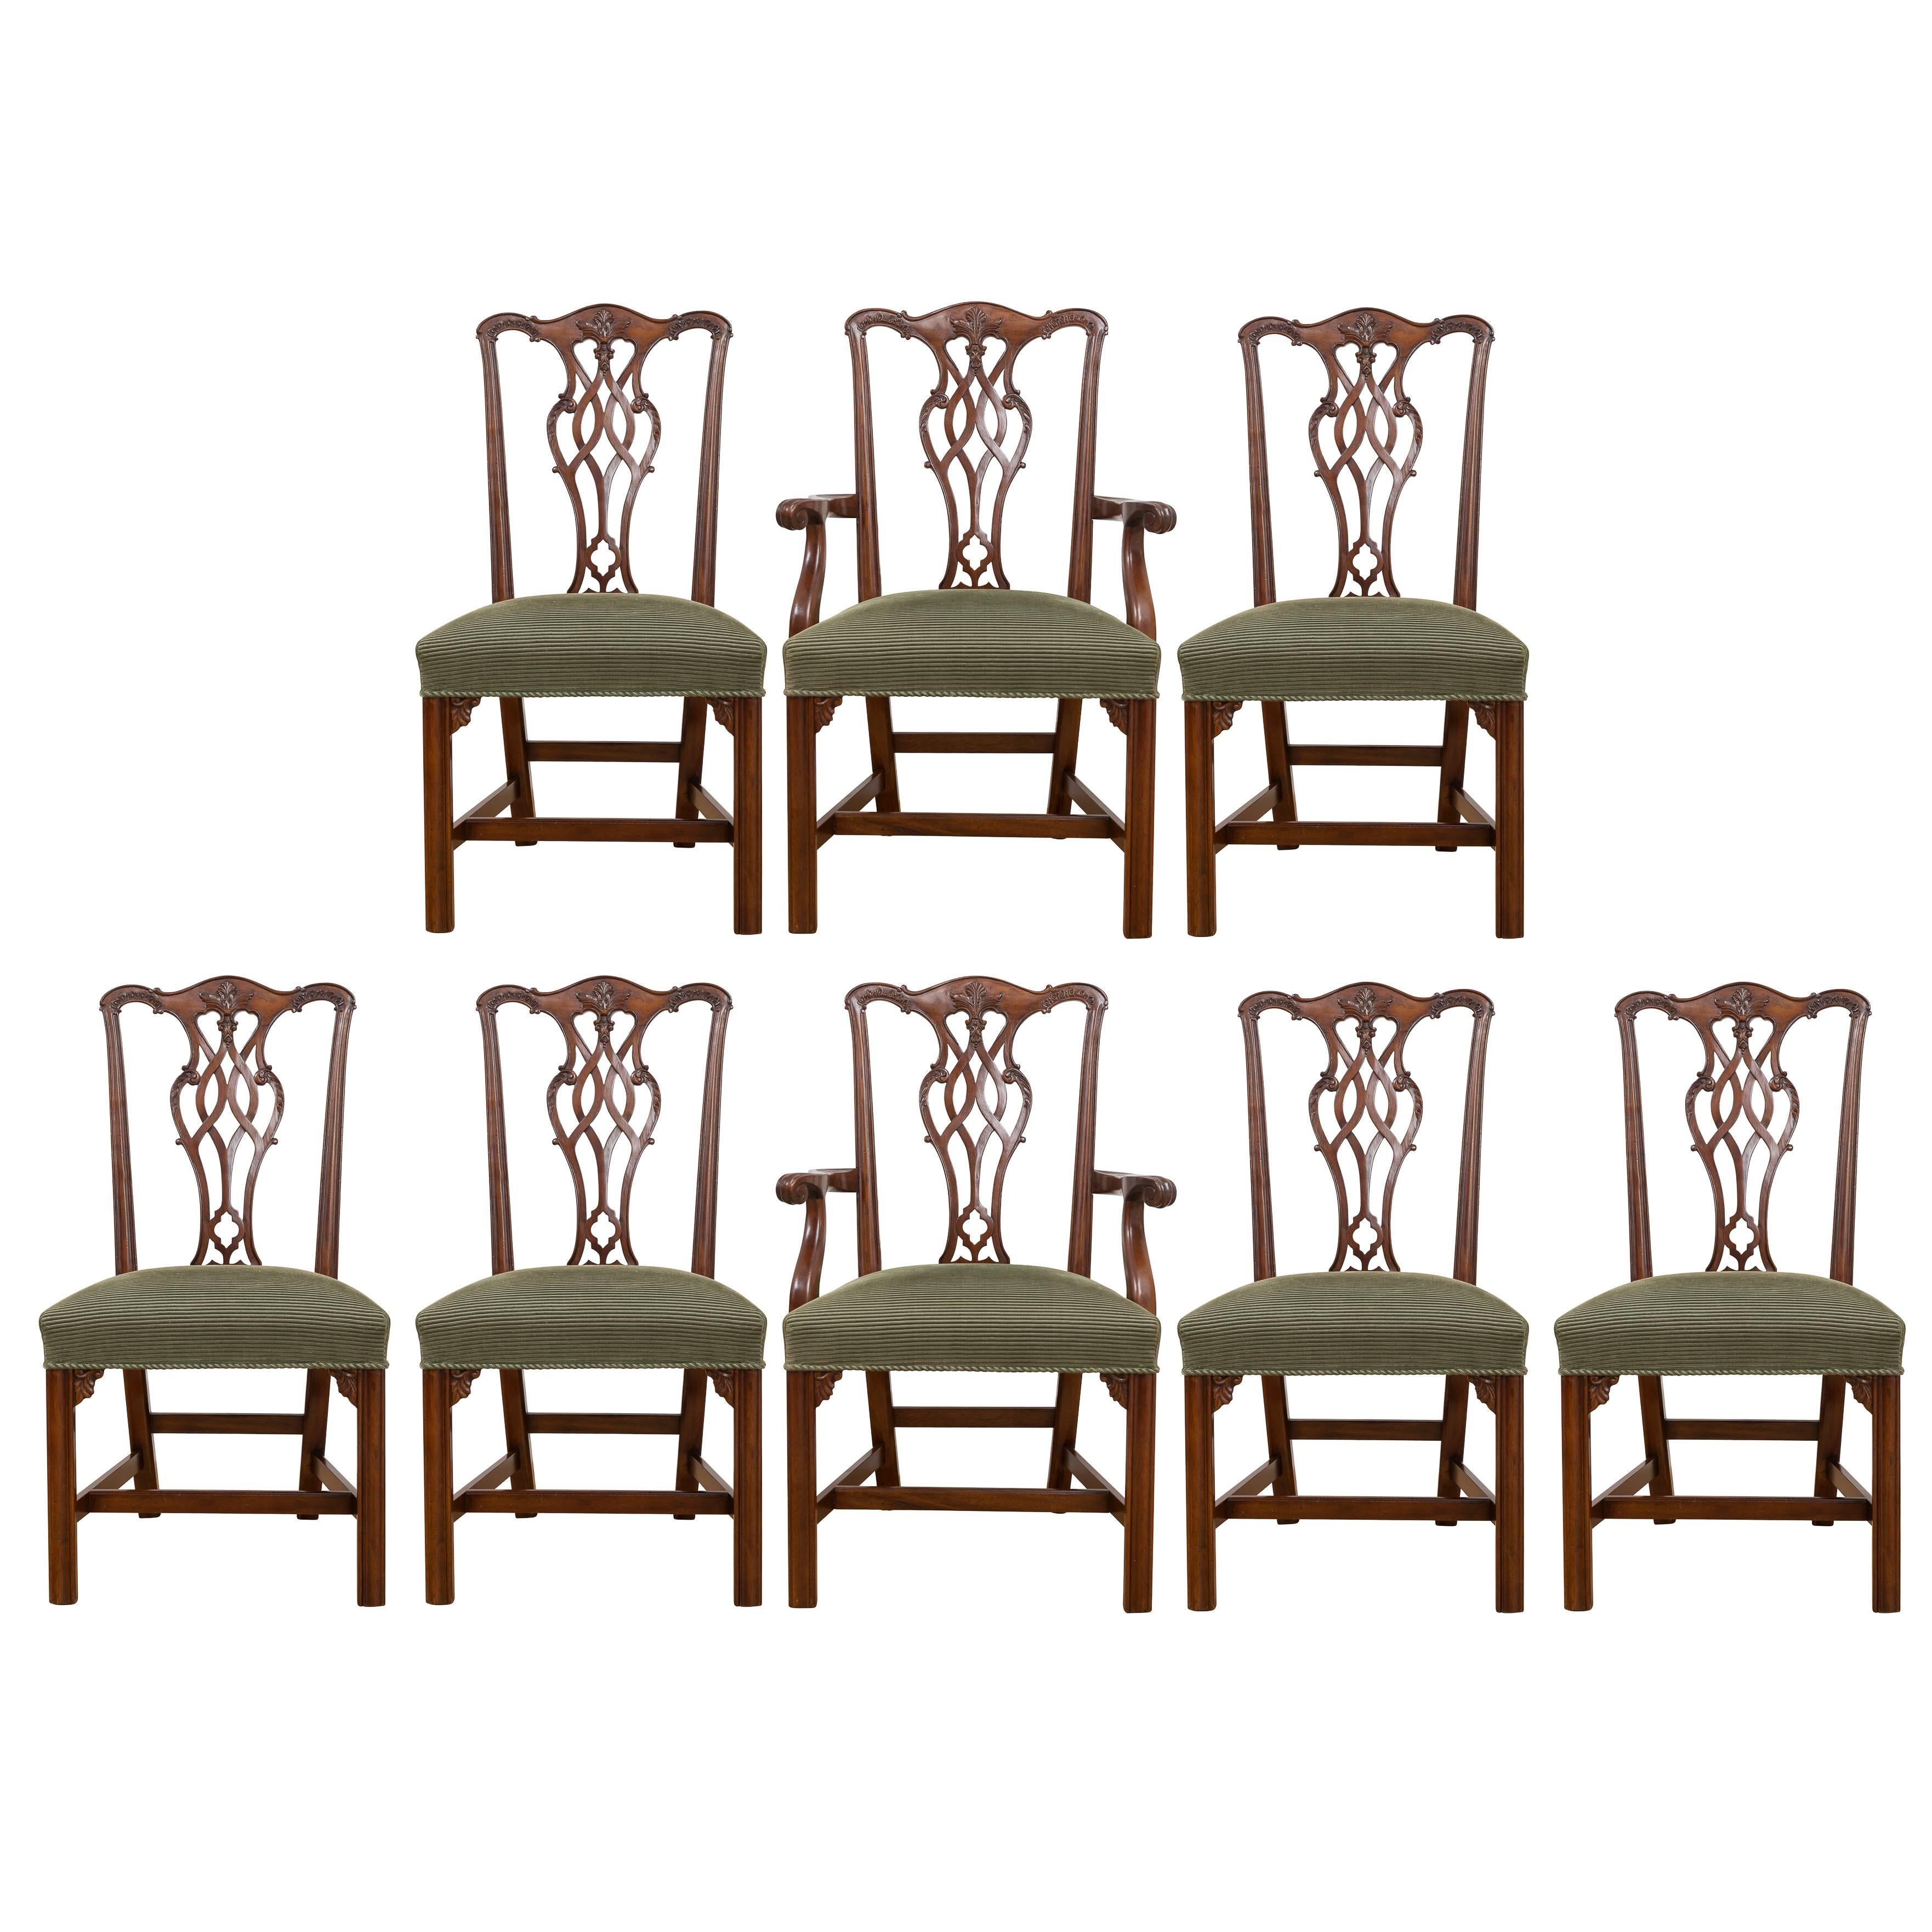 Reproduction 18th Century Chippendale Mahogany Chairs, Set of Eight